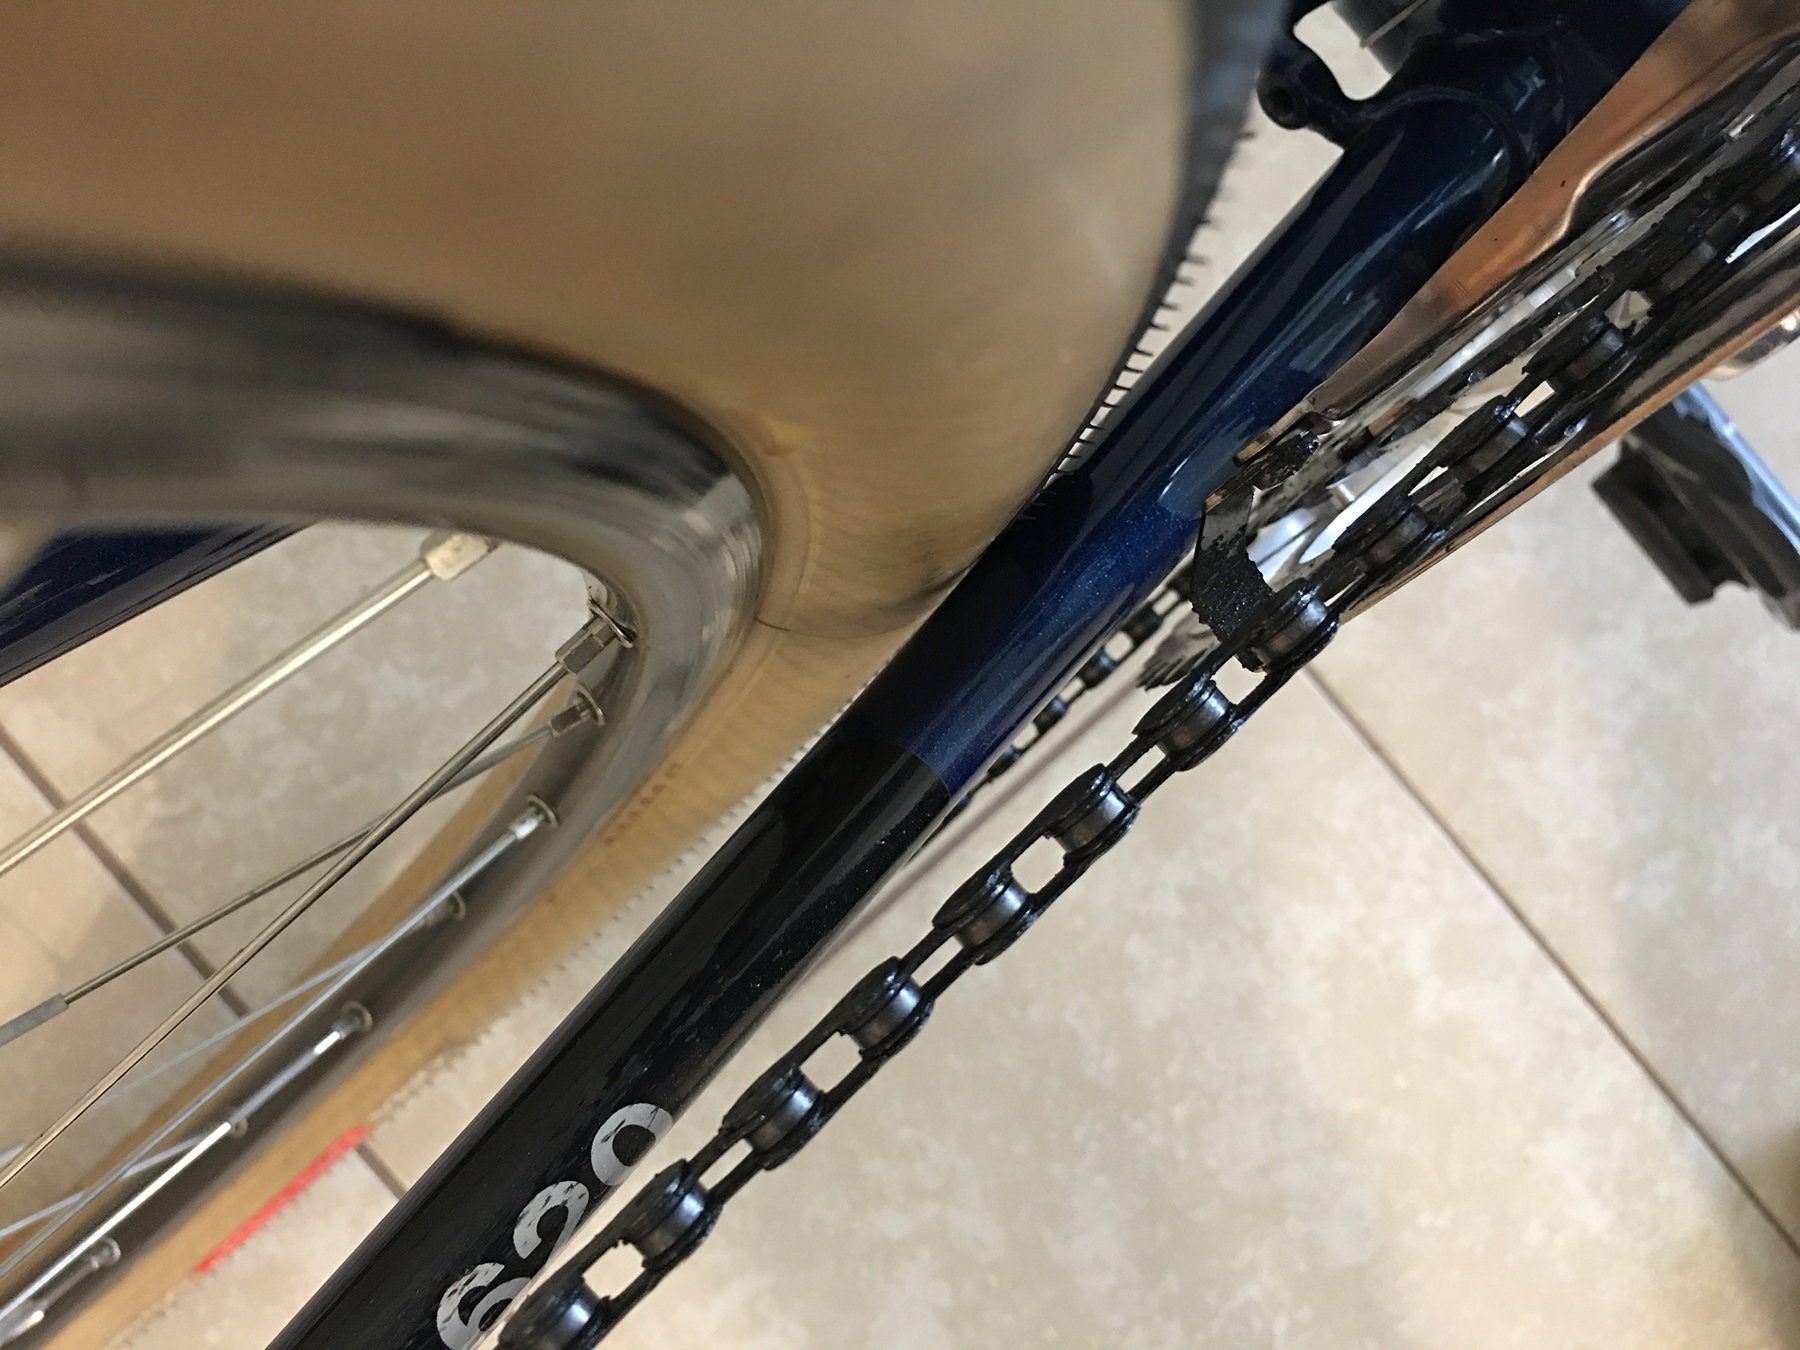 Extremely casual DIY chainstay dimpling -- Hey, it works! - Bike Forums